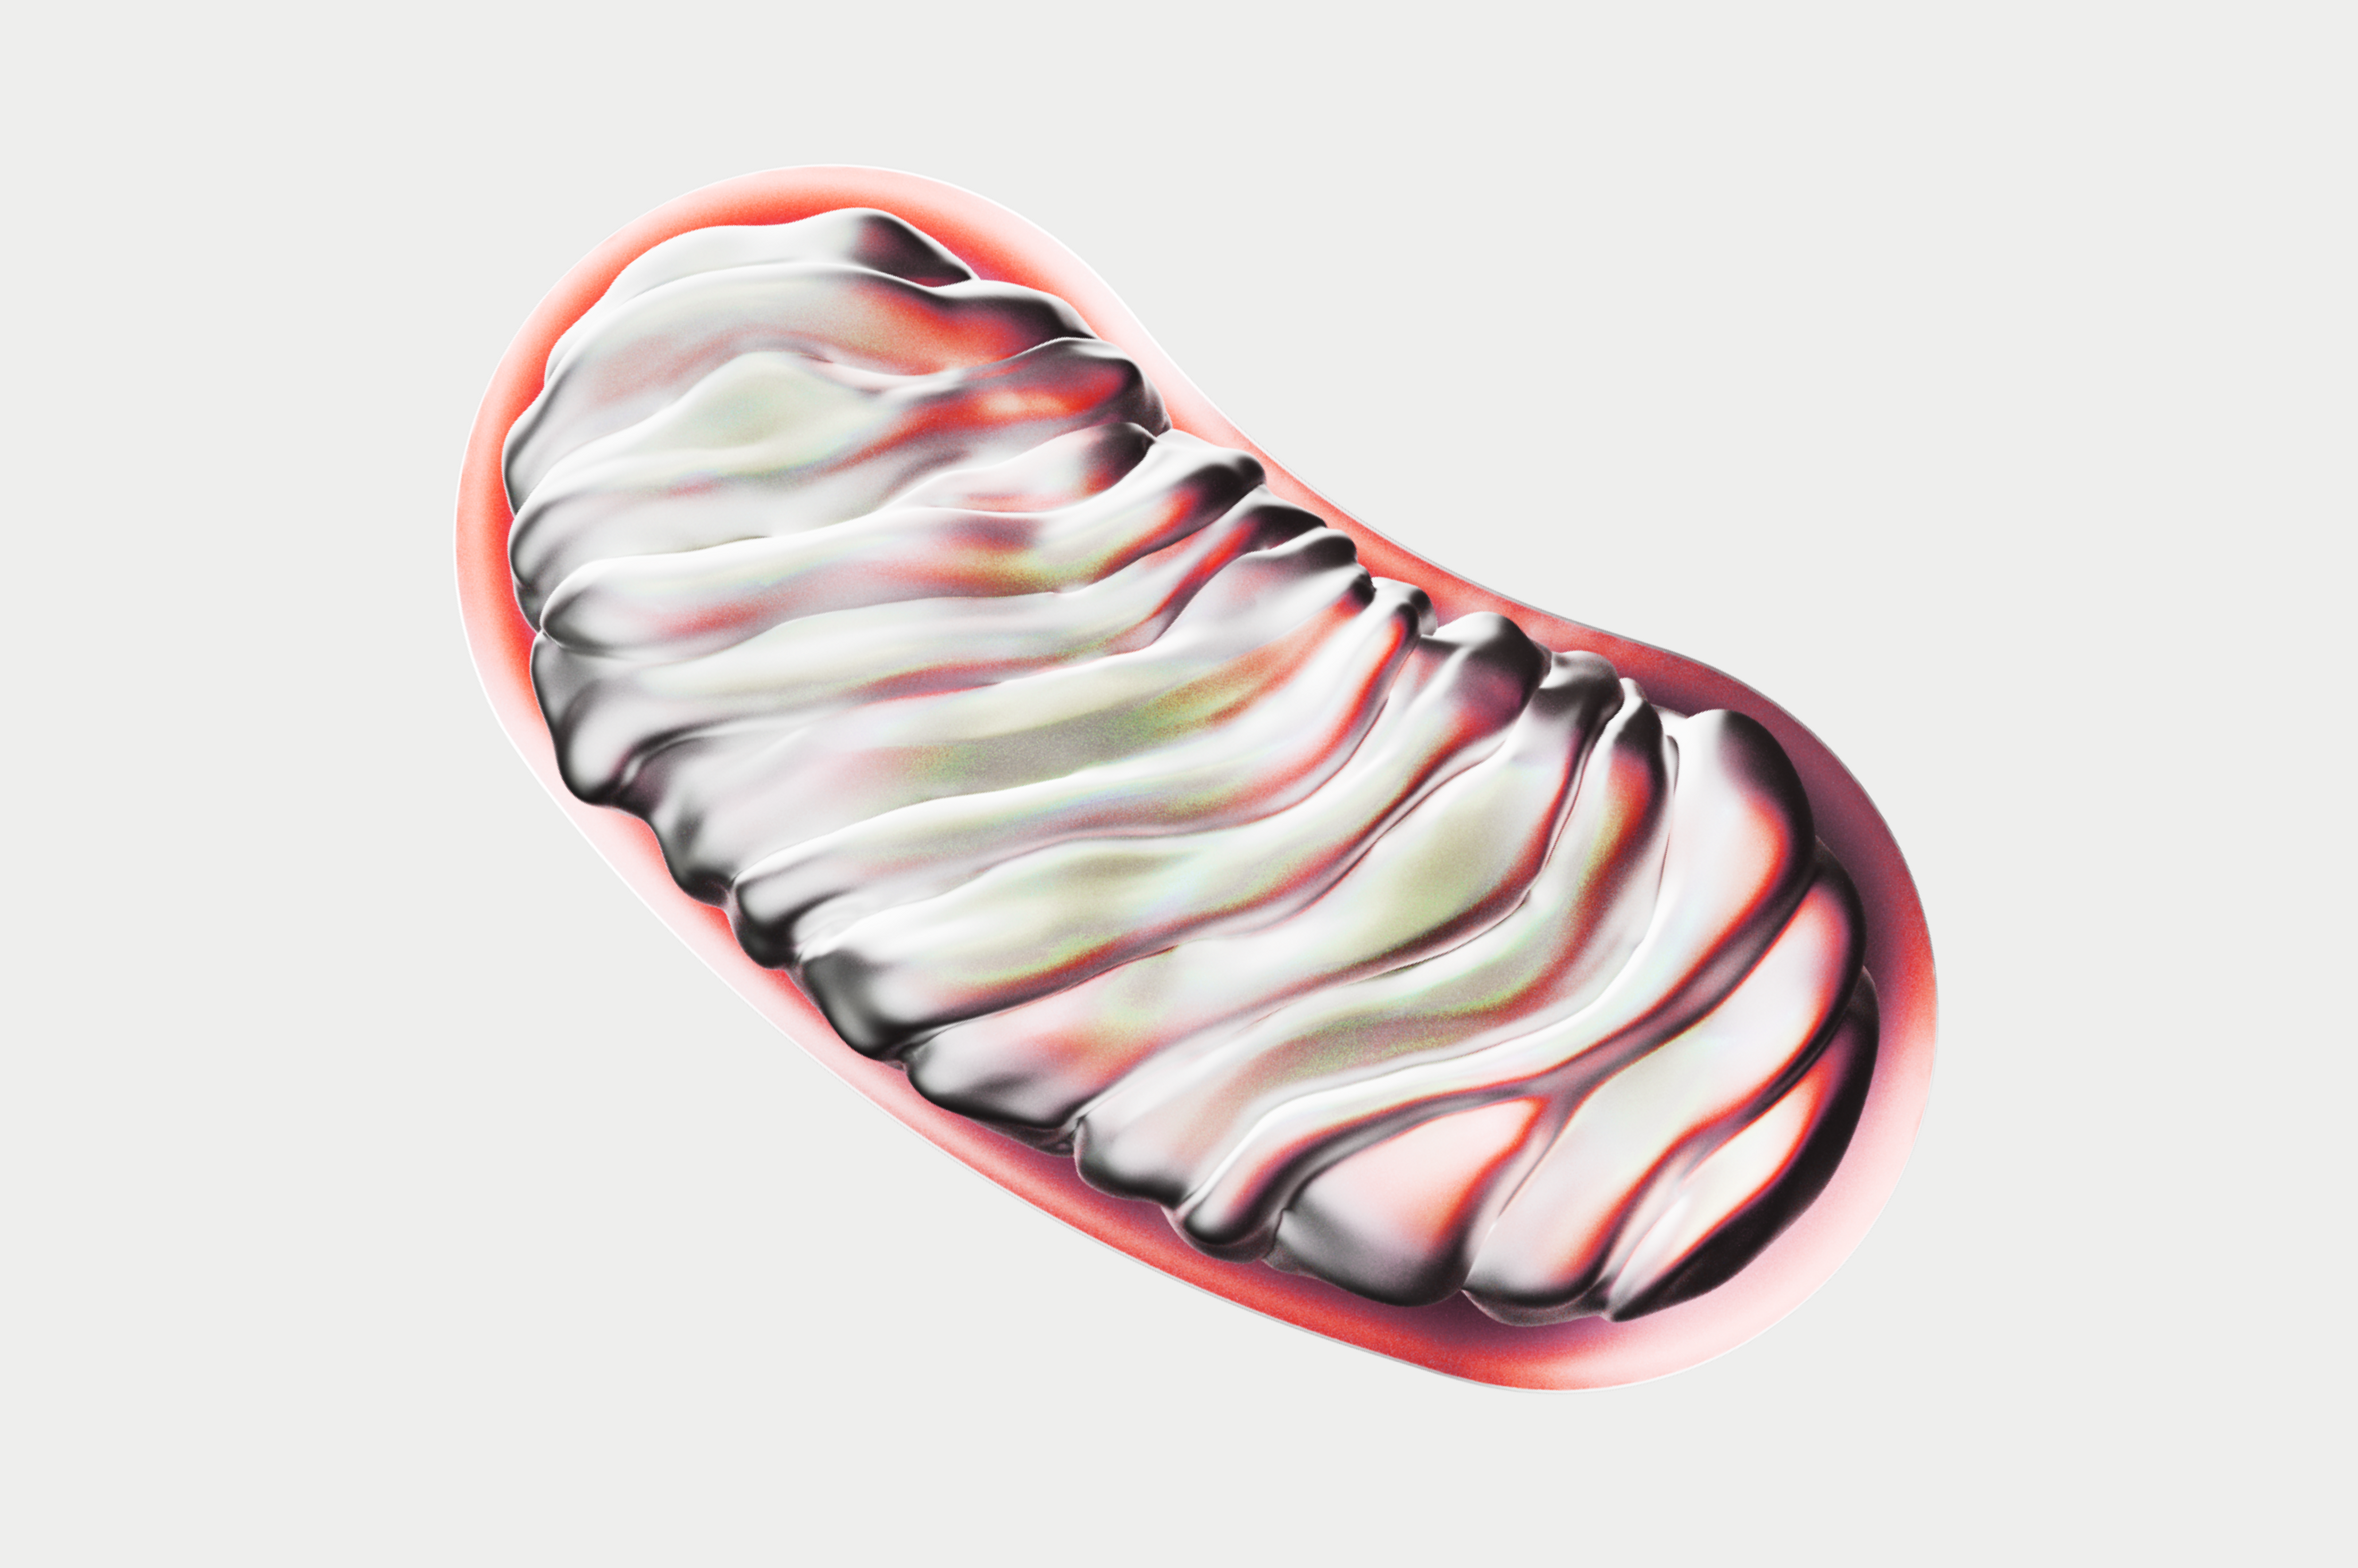 3D render of a stylized mitochondria